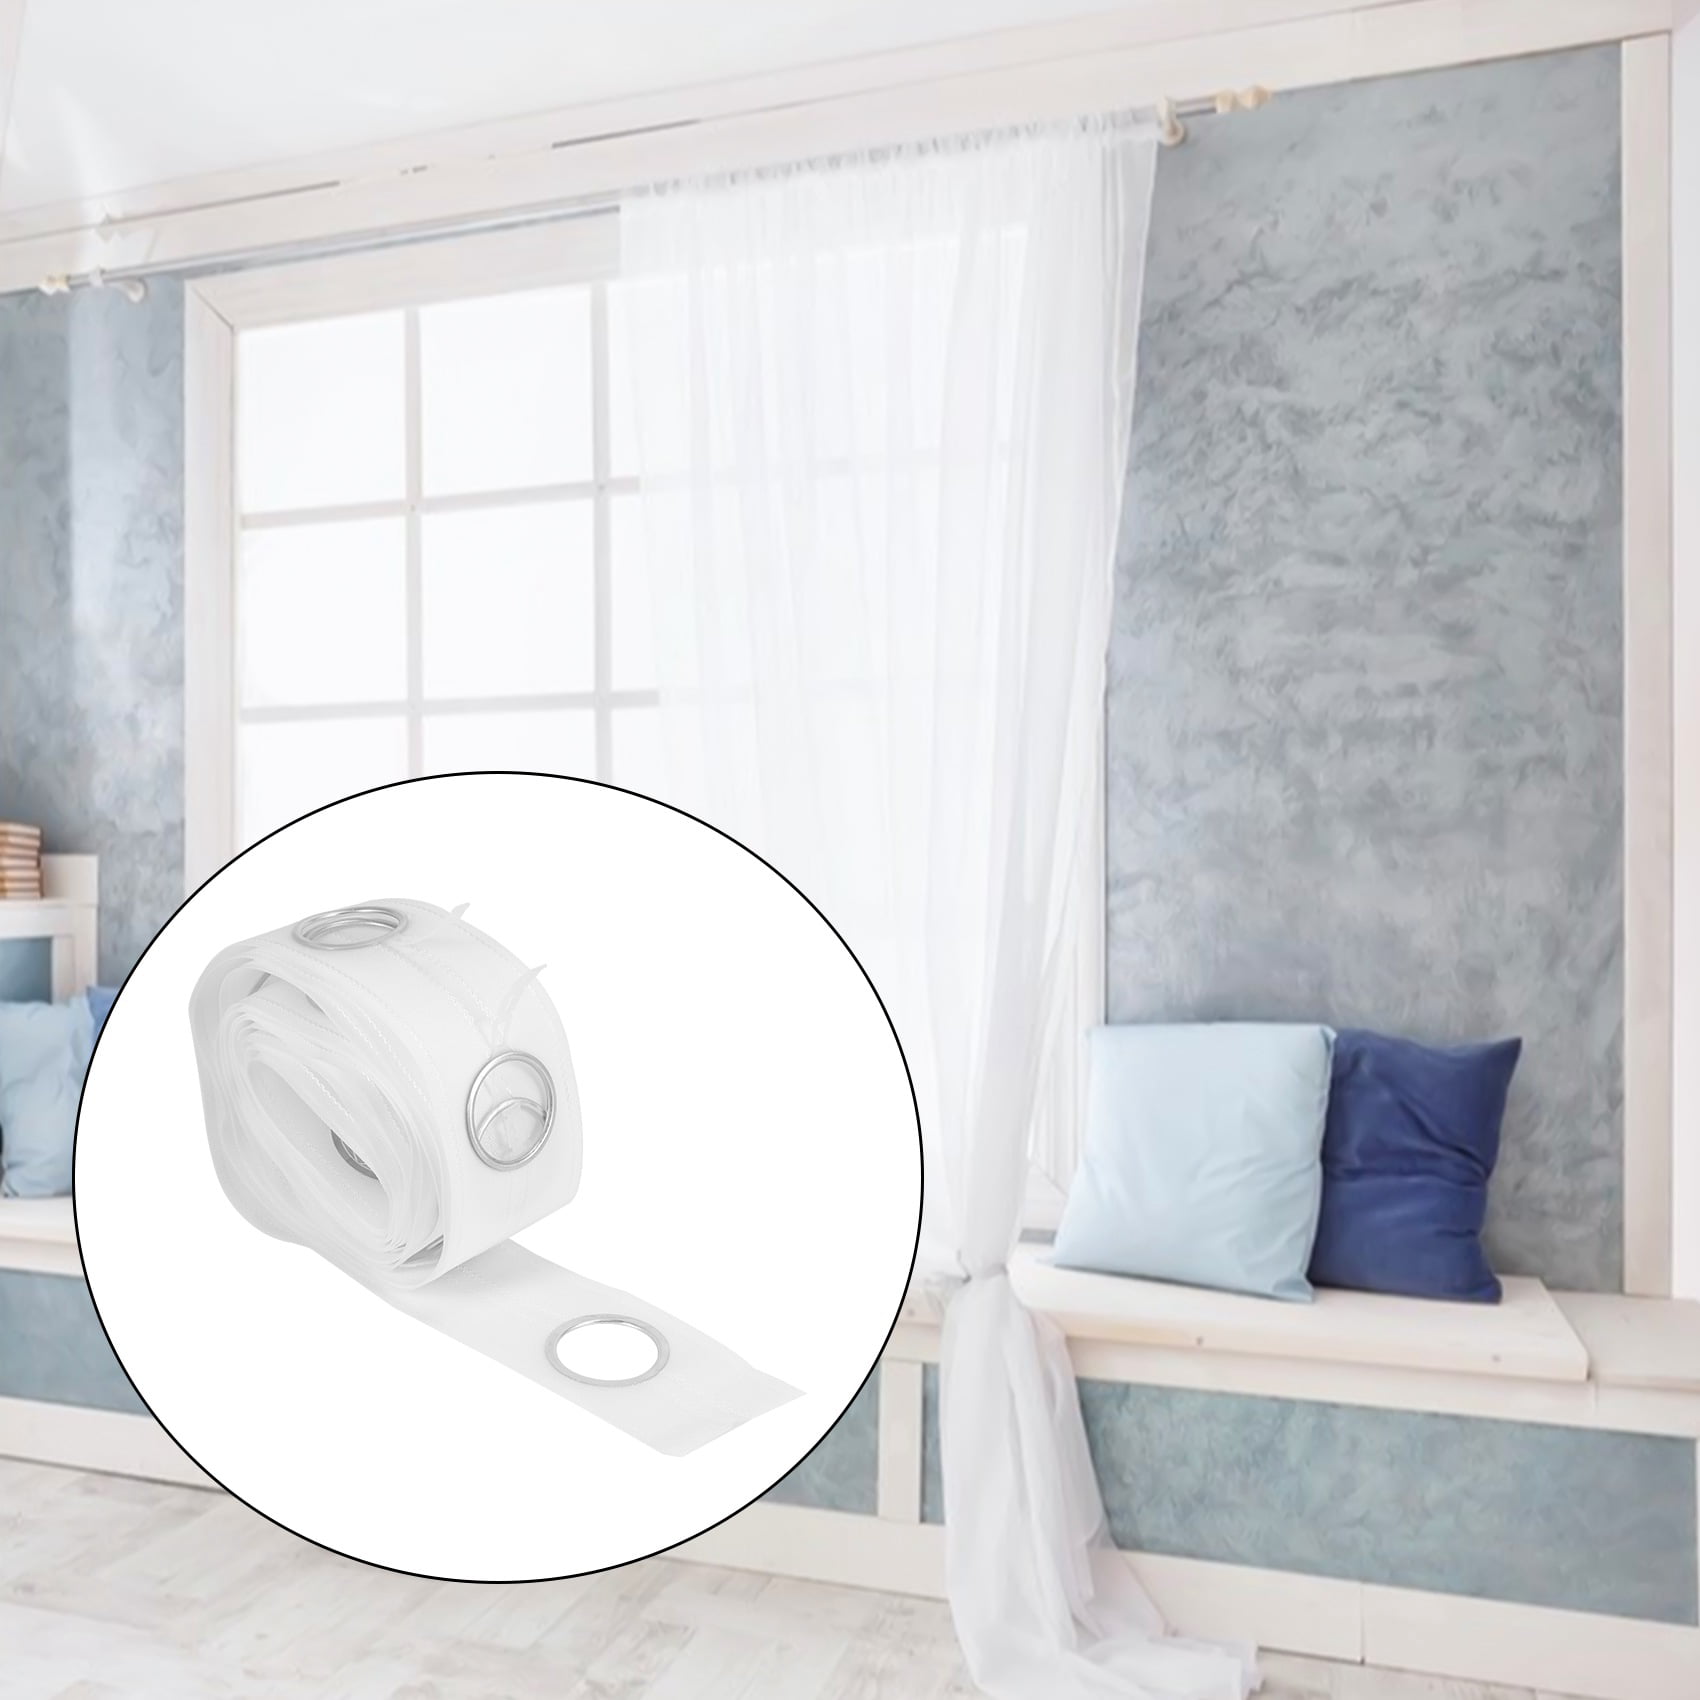 Curtain Eyelet Tape Non-woven Cloth Grommet Top Tape Sewing Silver  Transparent Tape w/ Rings Home Window Drapery Accessories